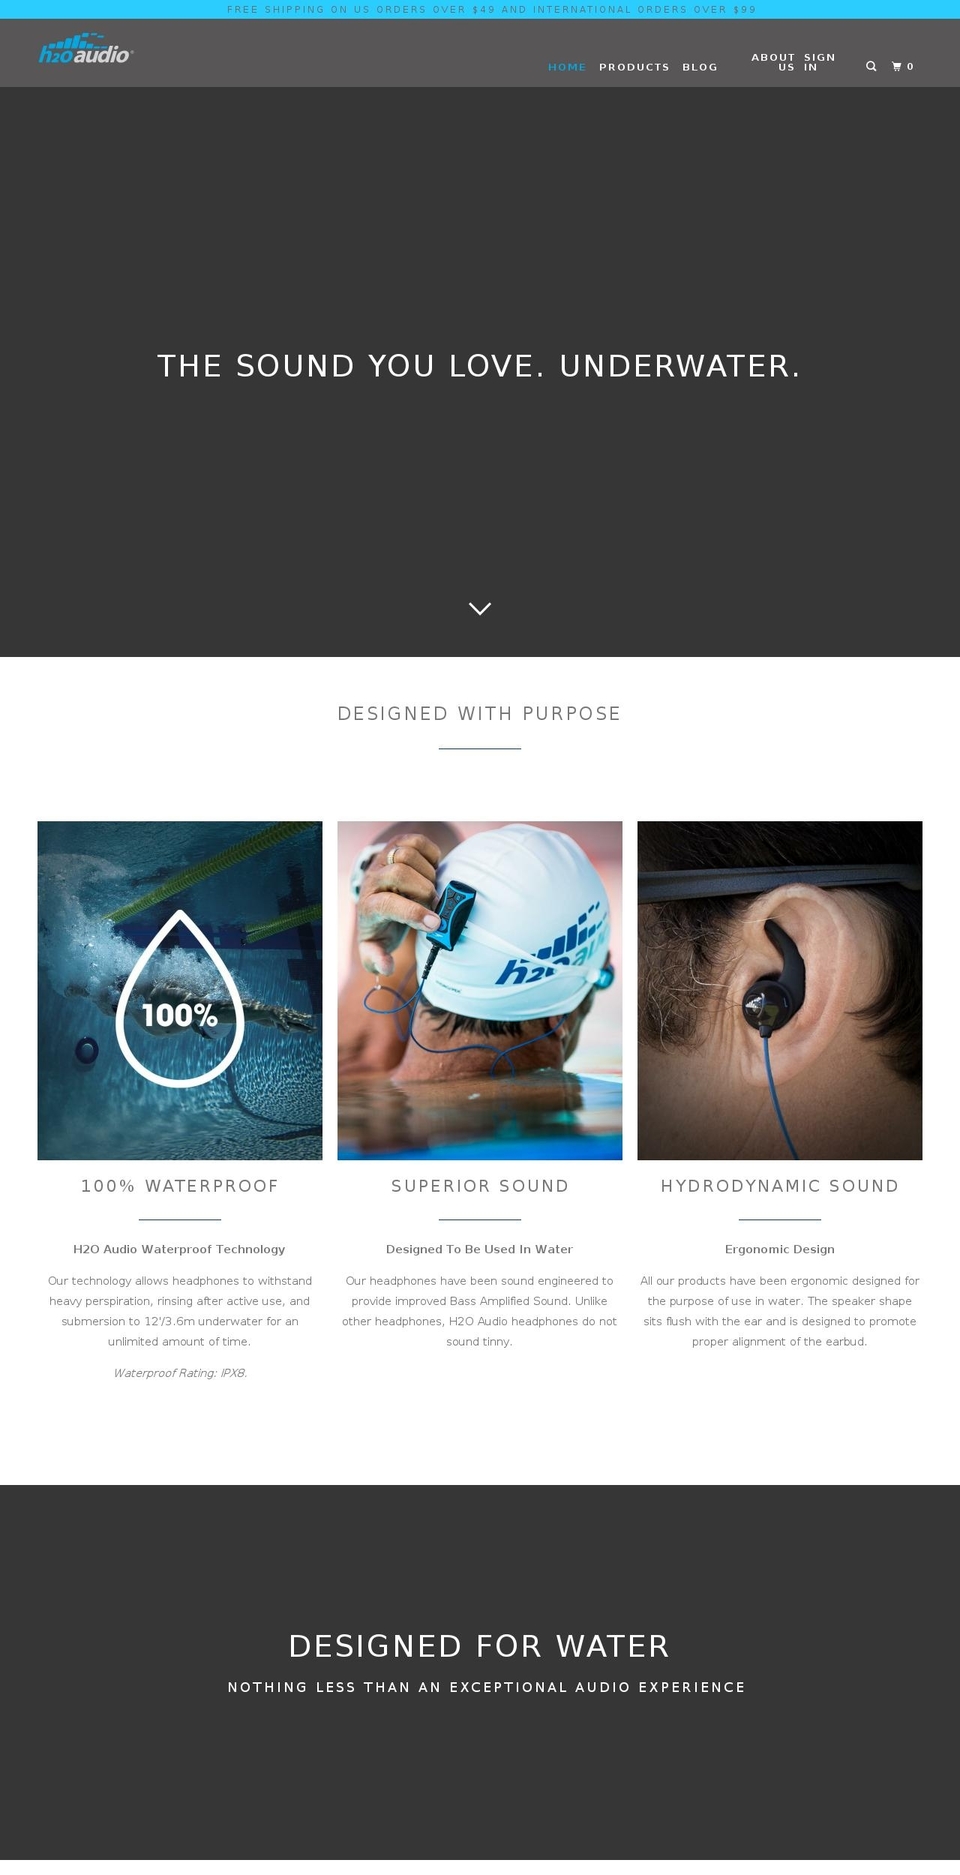 CLEAR IMAGES of Parallax-May-3-2018 Shopify theme site example h20audio.com